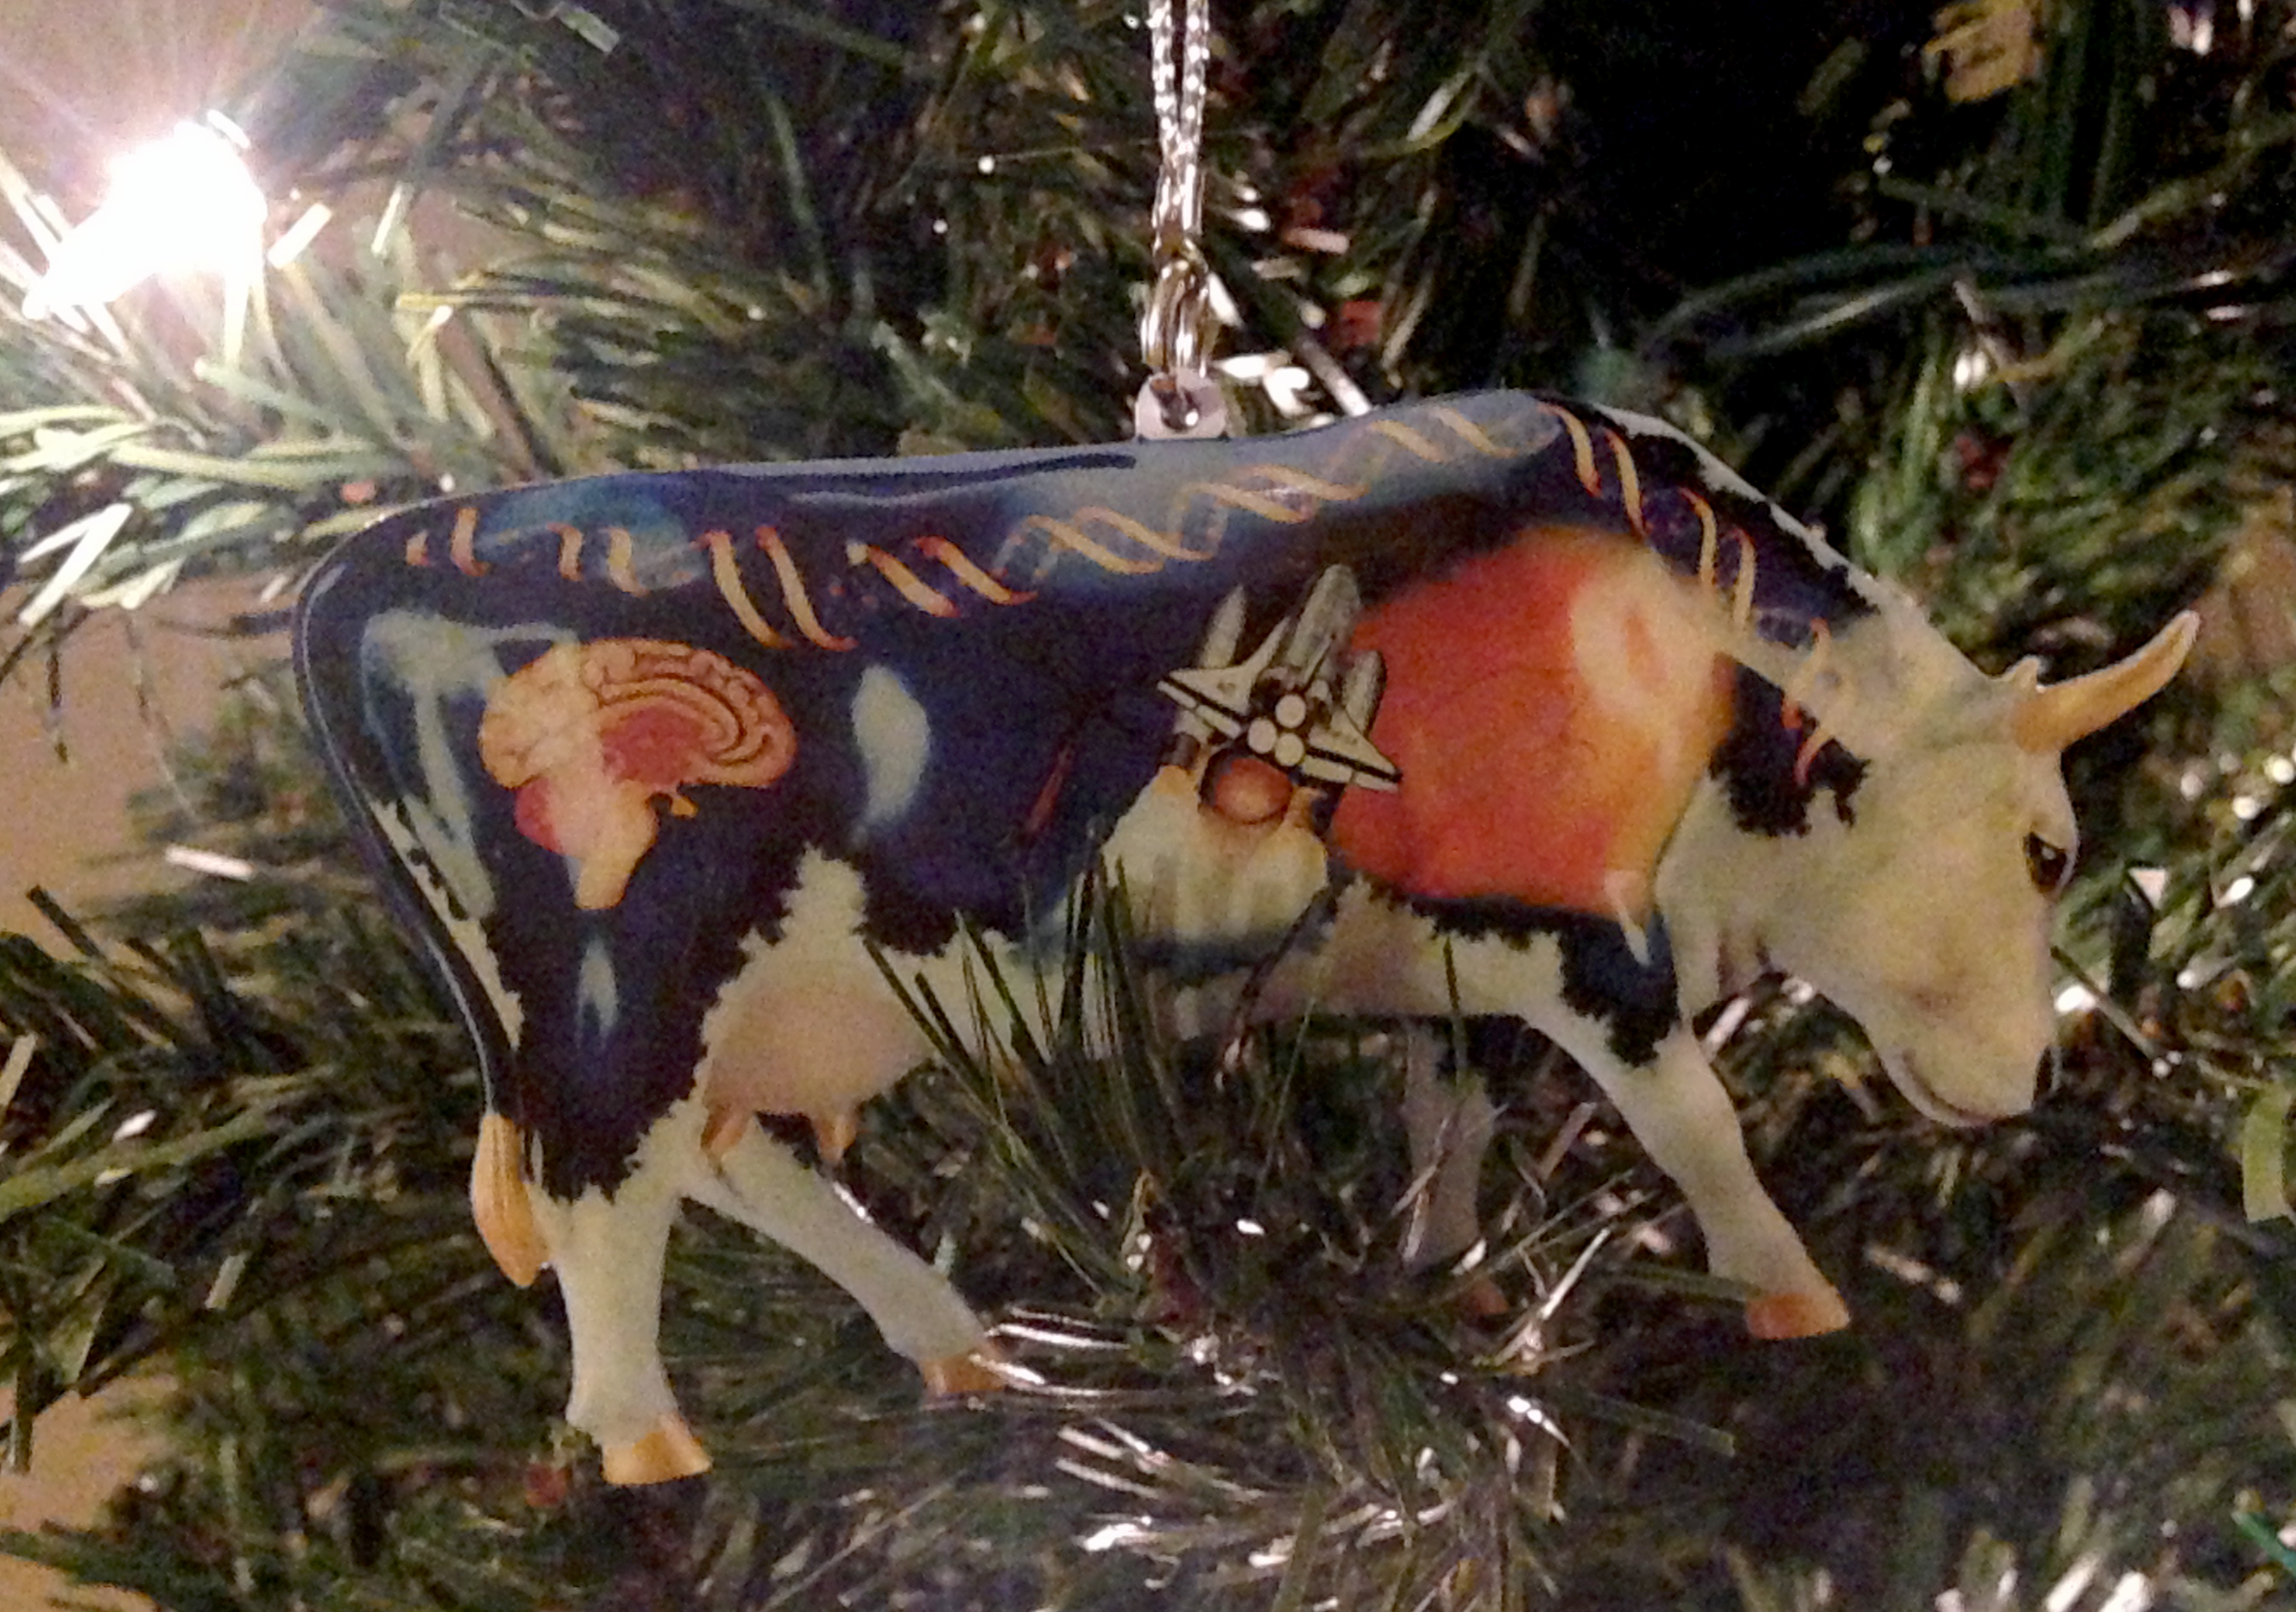 The photos may be new, but the Baylor Cowlege of Medicine ornament is 13 years old.